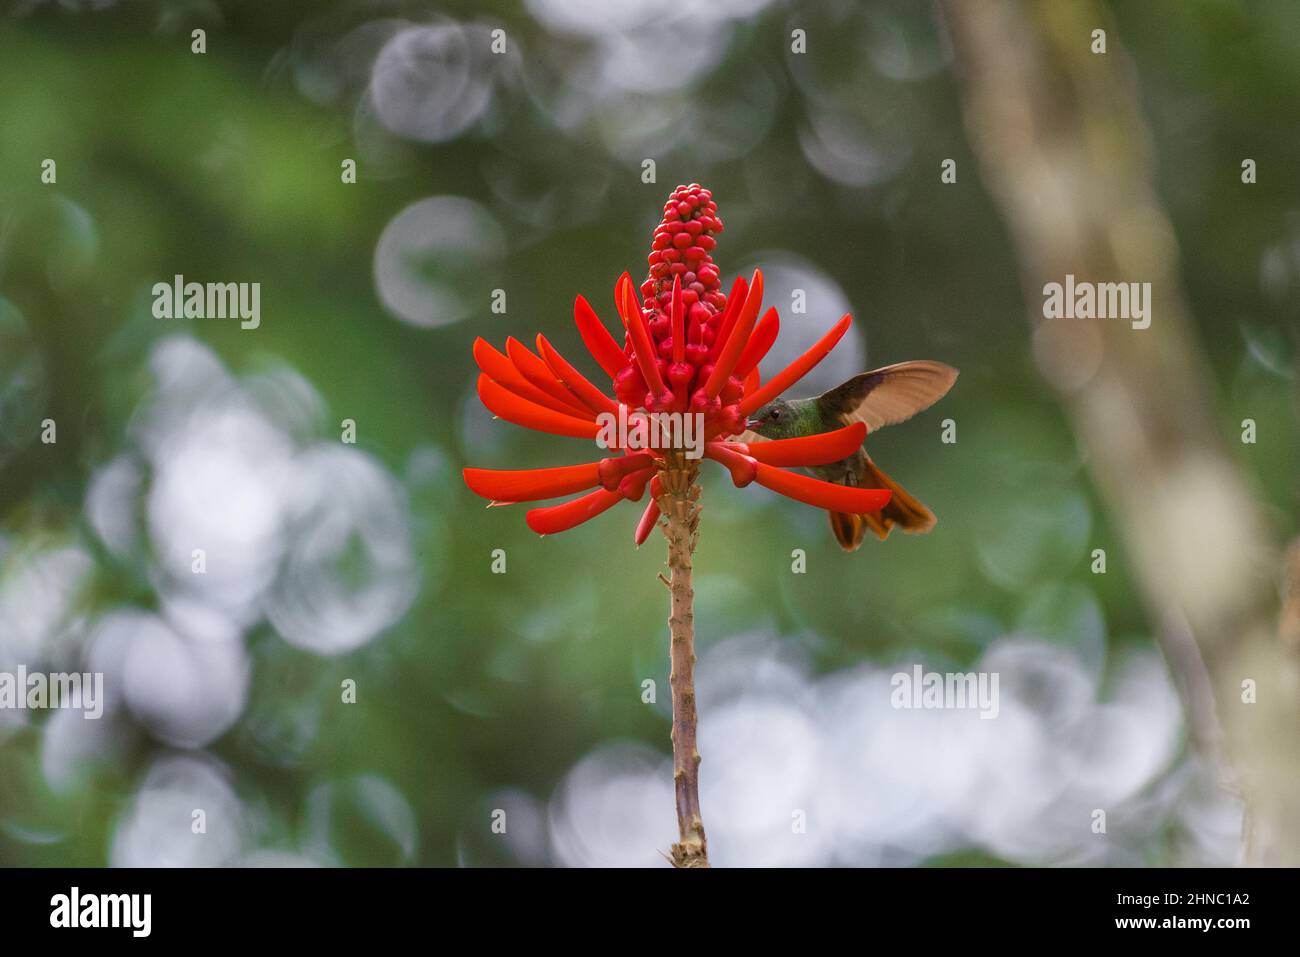 Closeup of a Colibri and the Erythrina coral against the blurred background of the tree branches Stock Photo